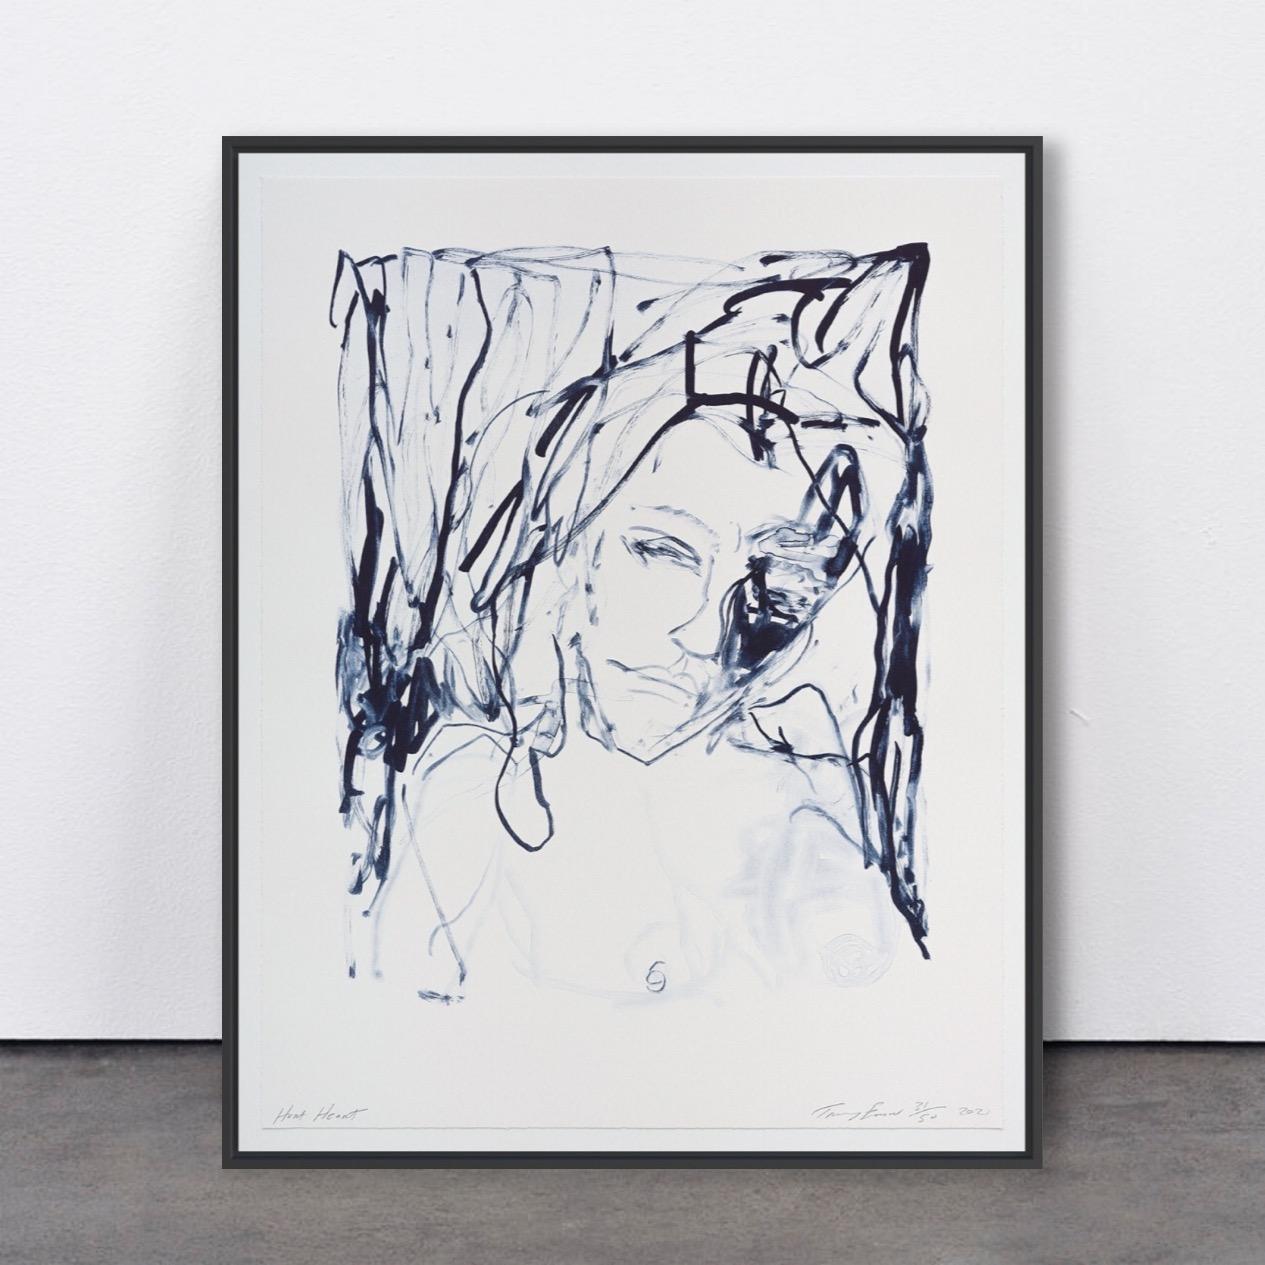 Tracey Emin Figurative Print - Hurt Heart (from A Journey to Death) - Emin, Contemporary, YBAs, Lithograph